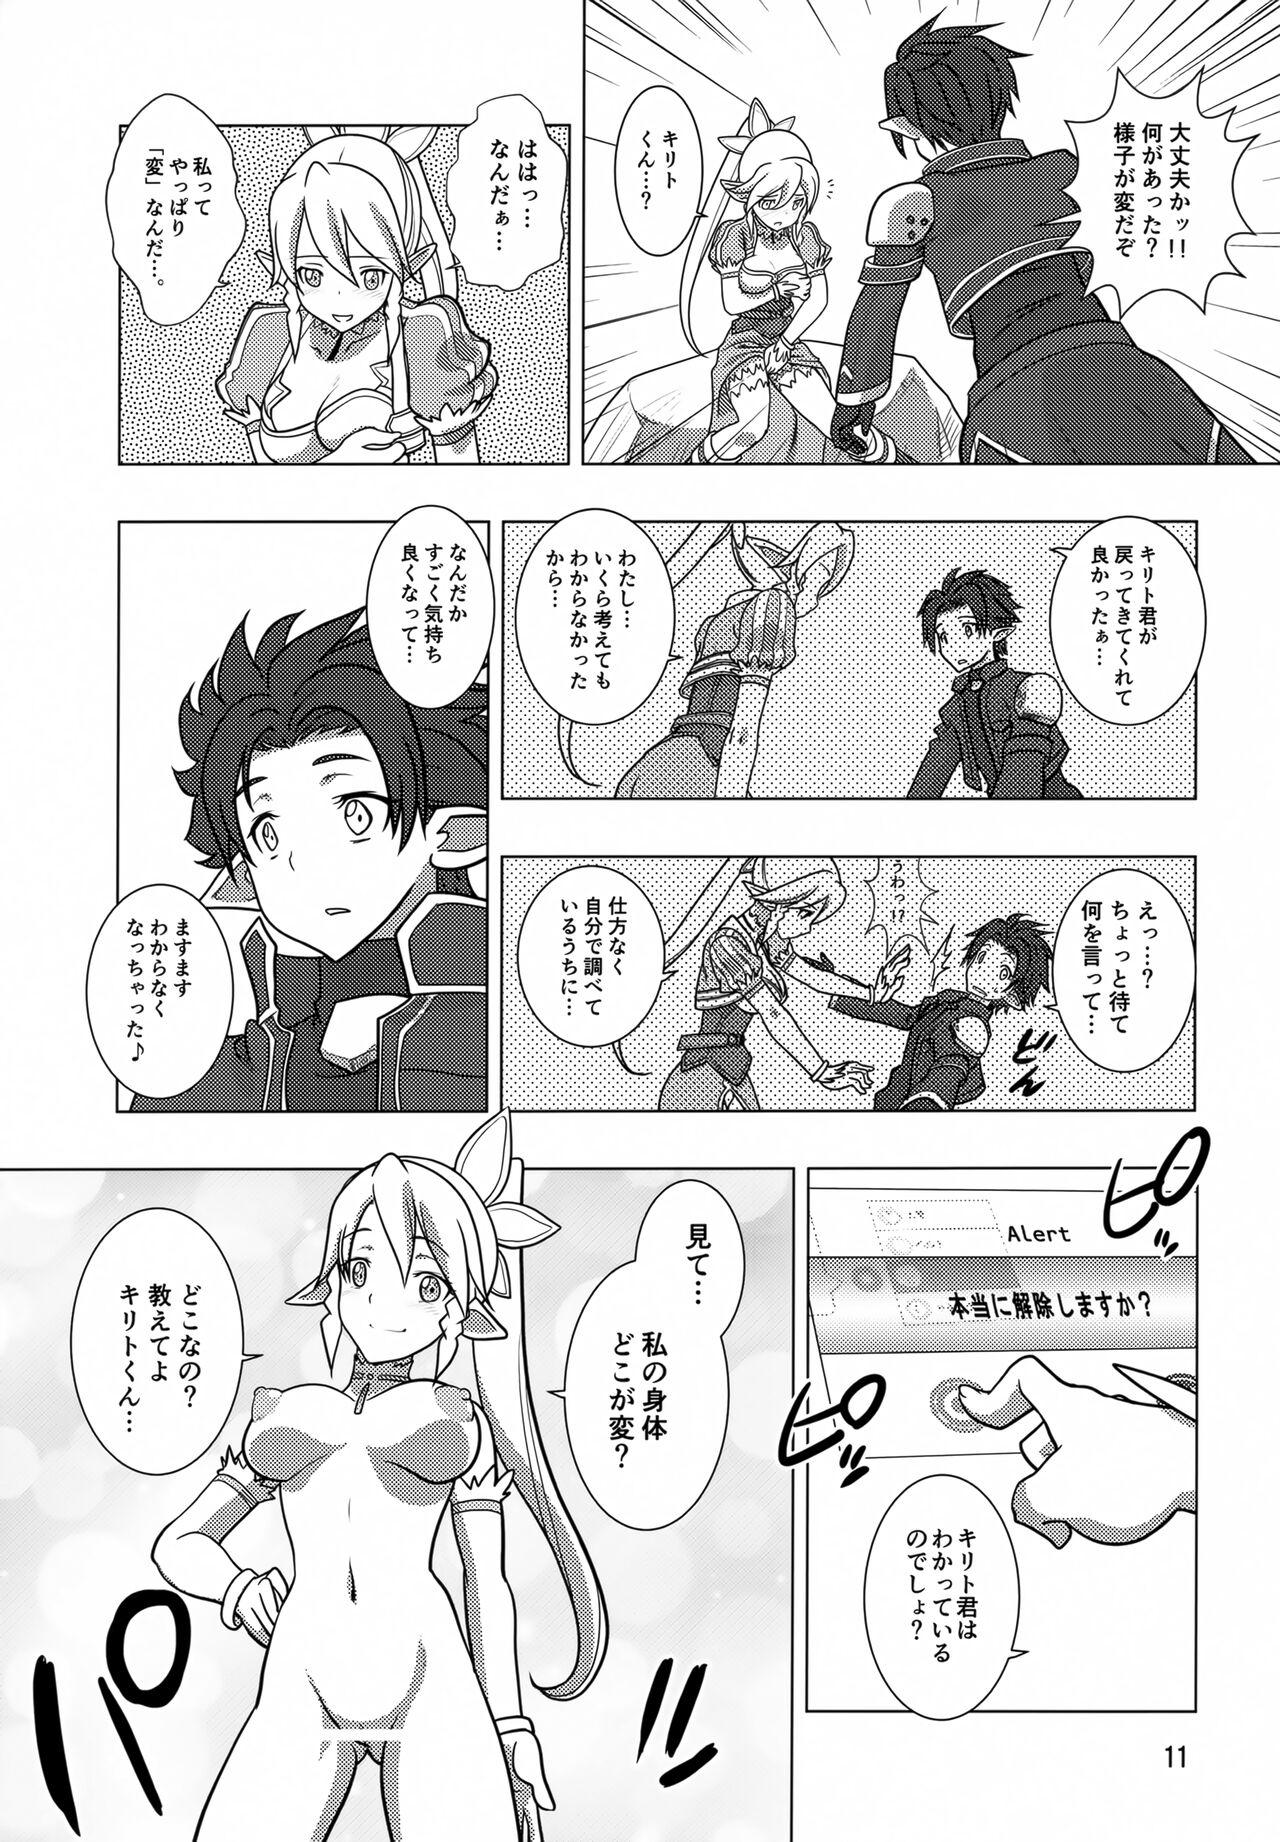 Usa Rifatto - Sword art online Lesbos - Page 10